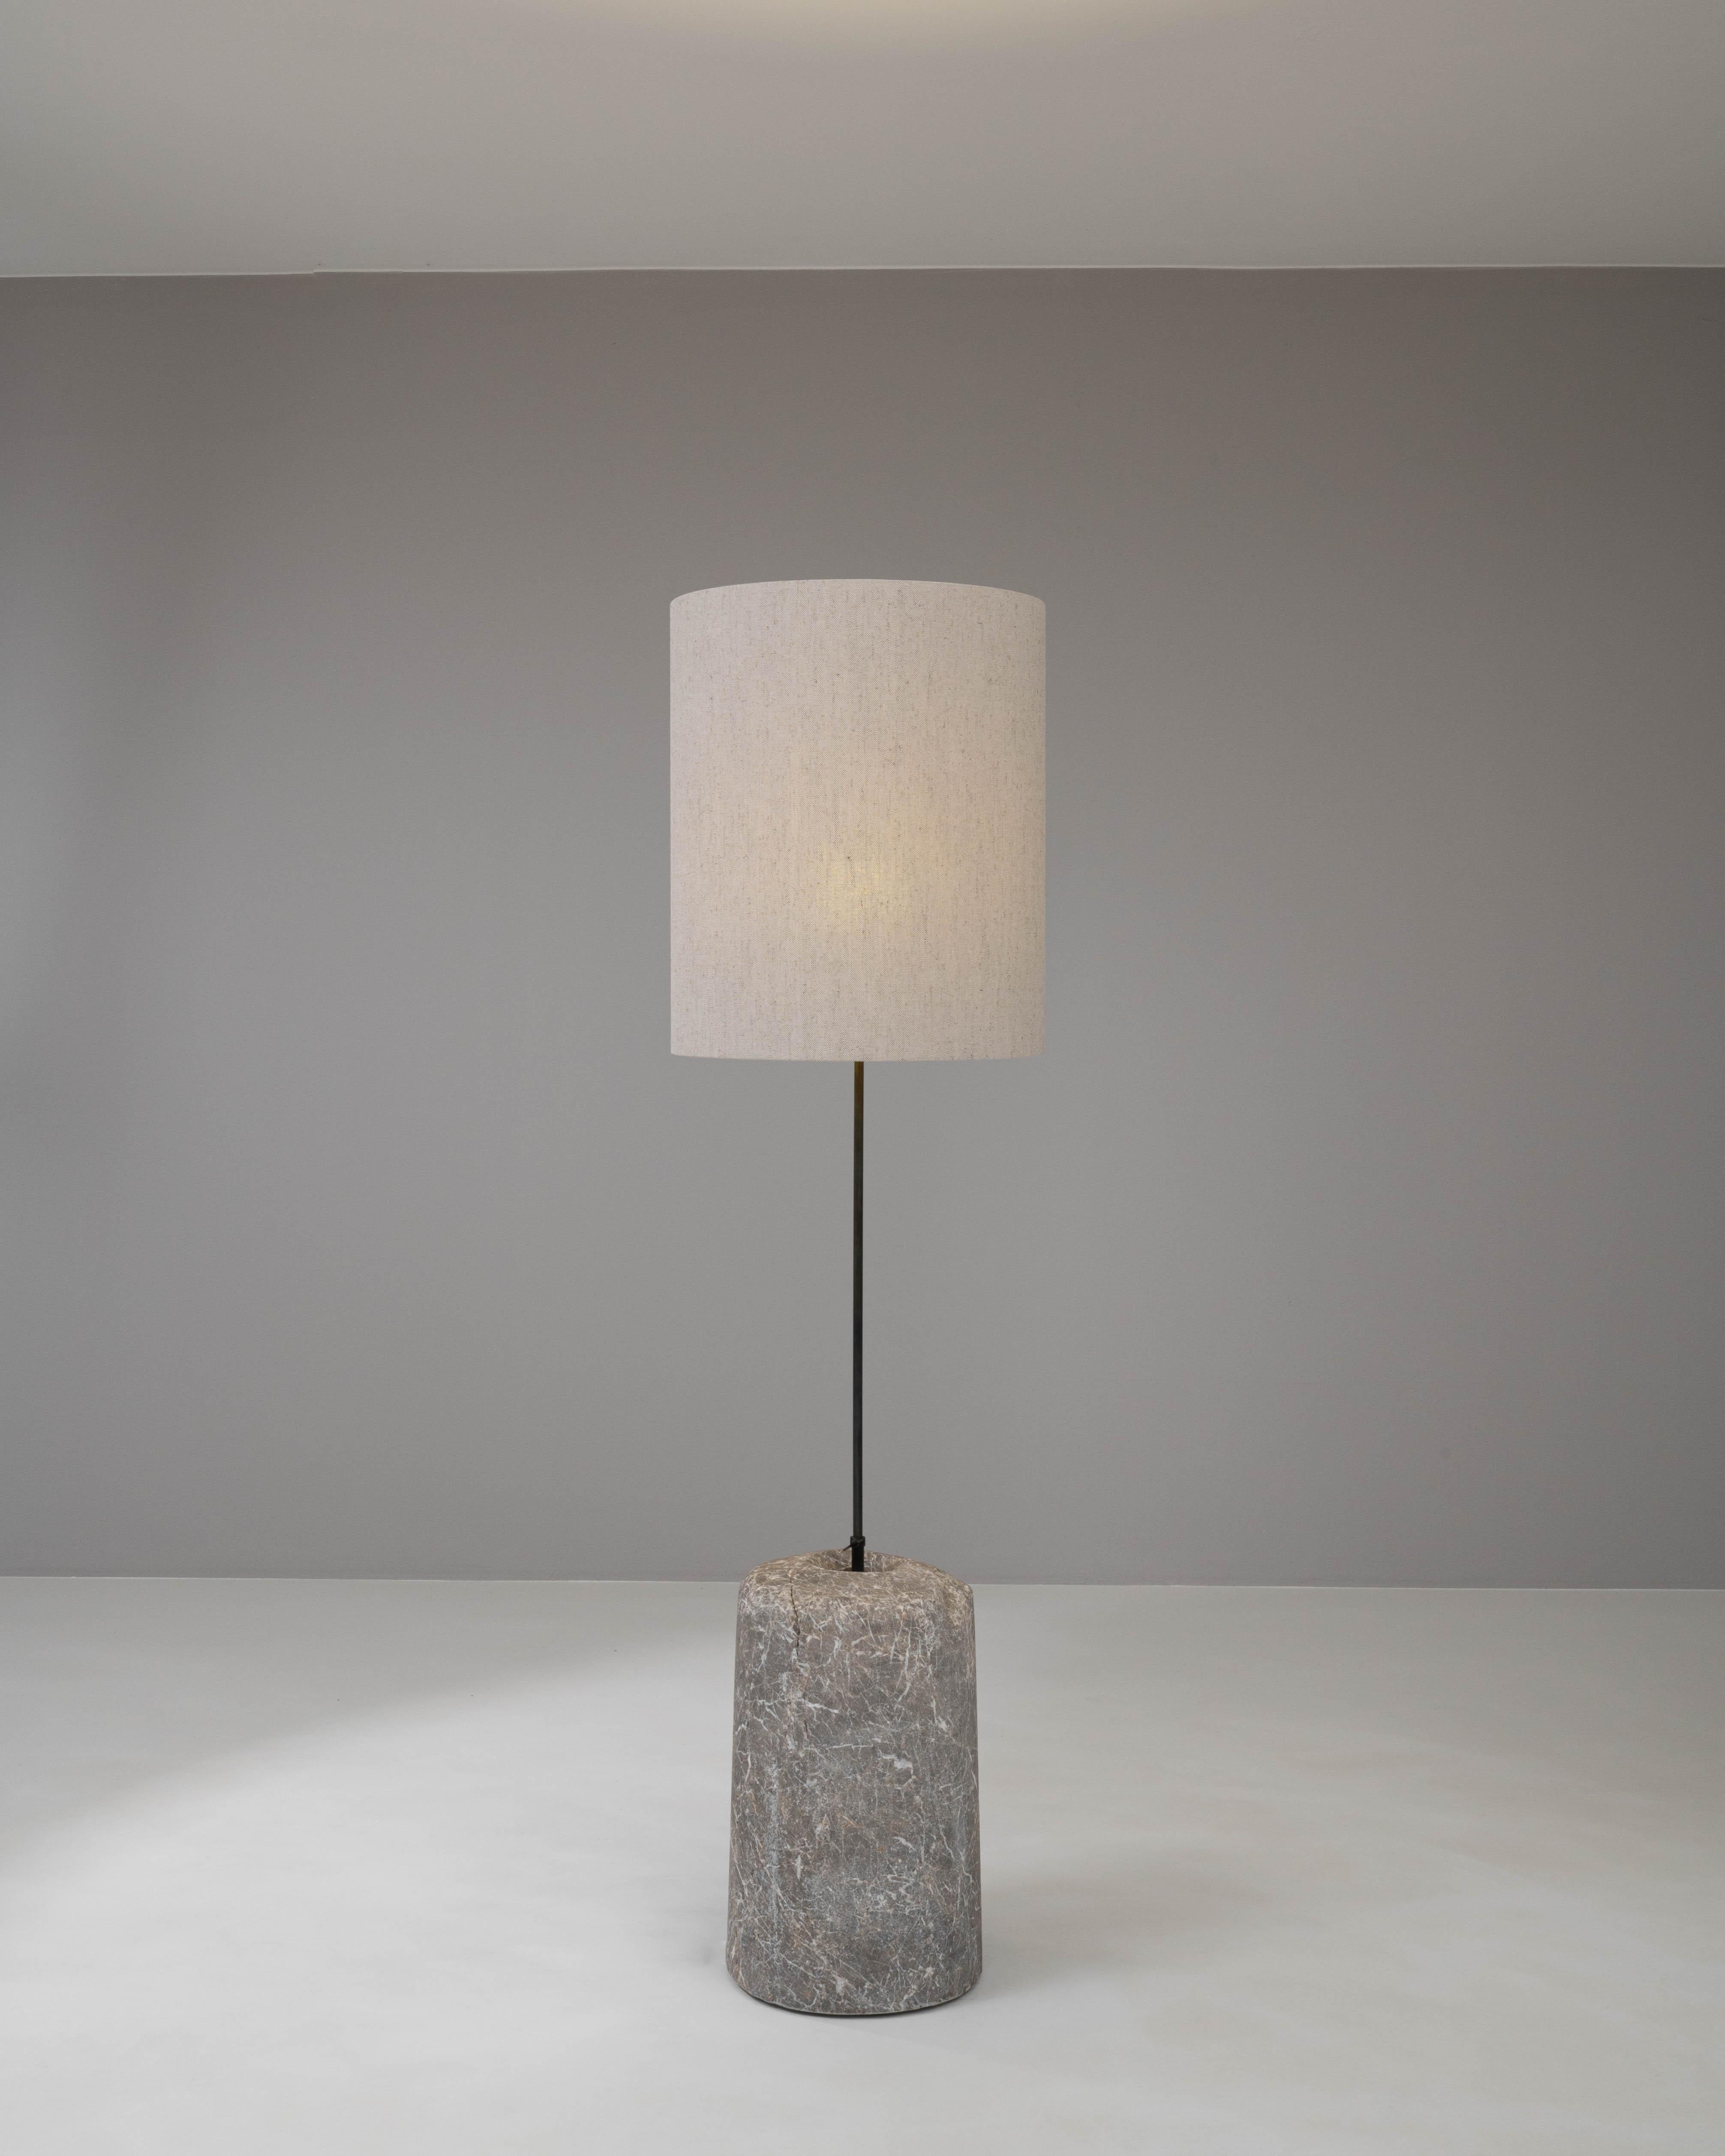 Anchor your space with the solidity and sophistication of this 1900s European floor lamp, a fusion of natural marble and sleek metal. The robust, cylindrical marble base is a statement of nature's artistry, with intricate veins and textures that